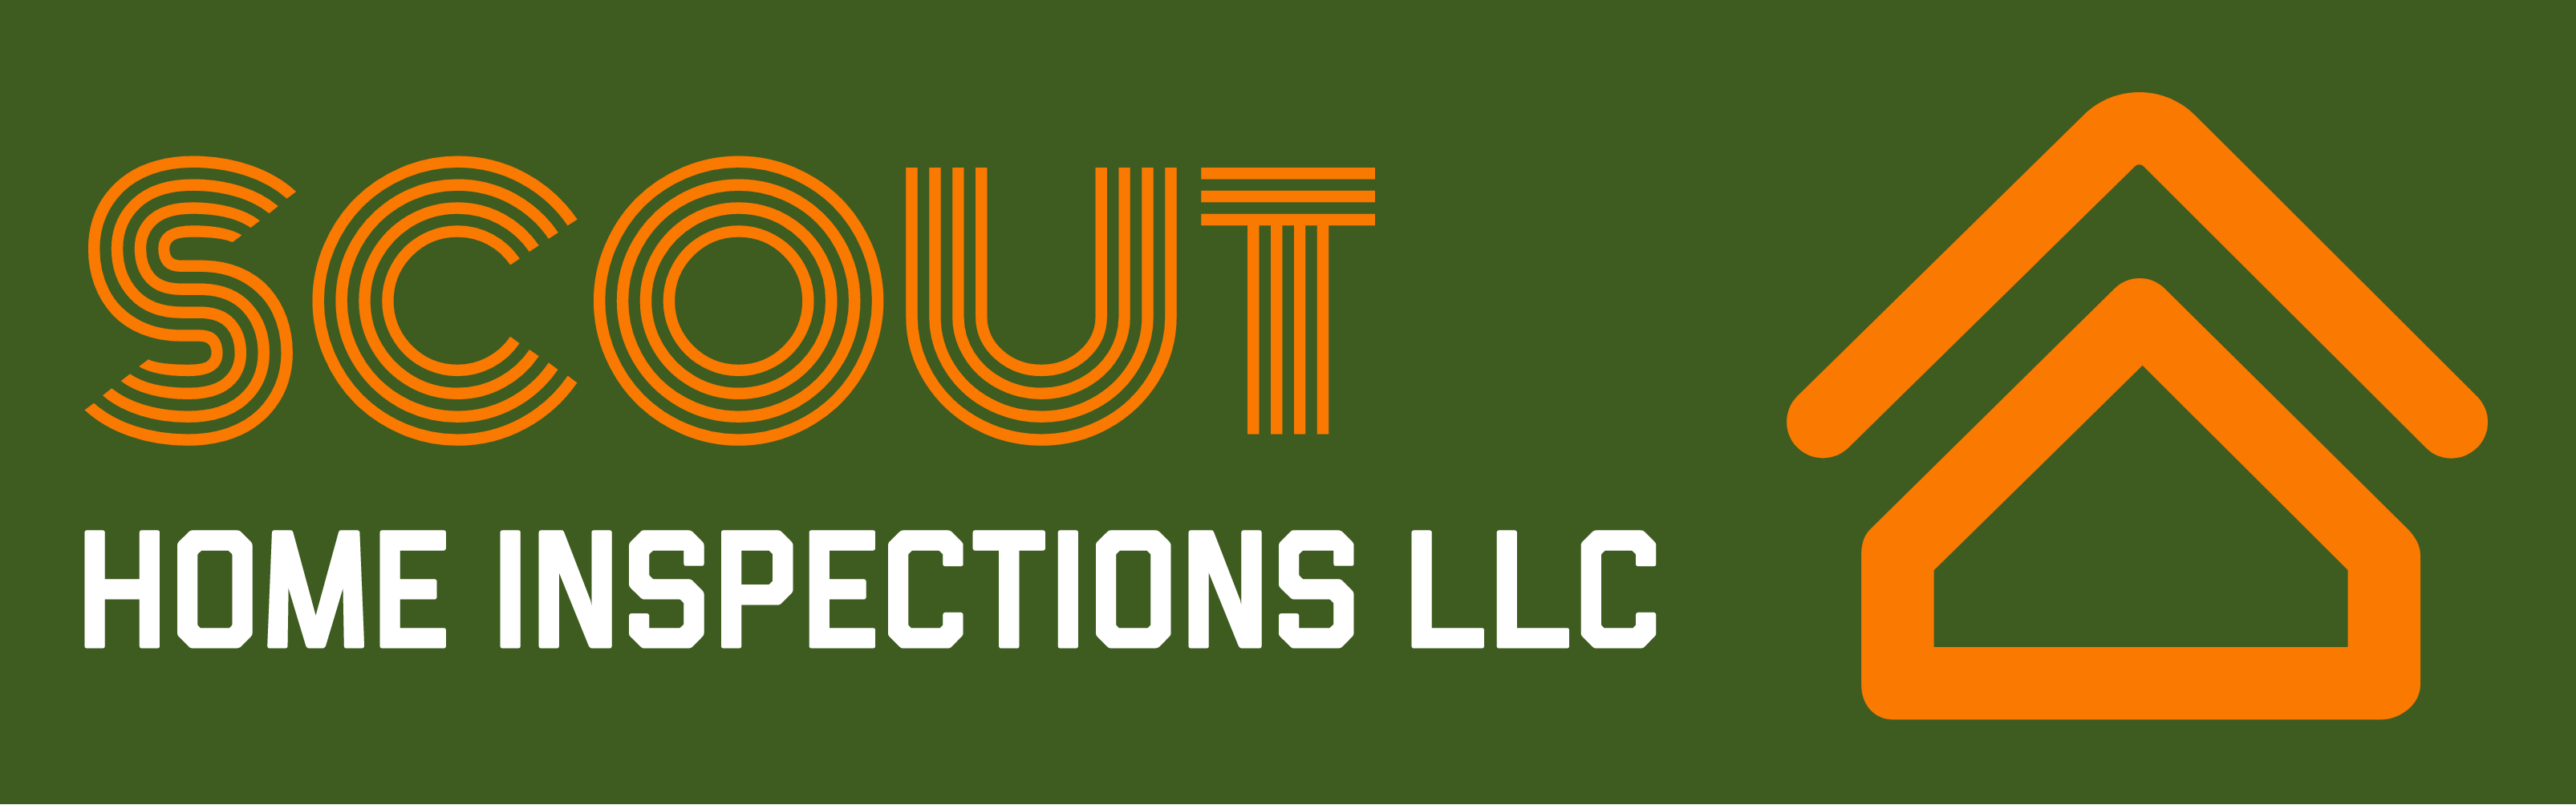 Scout Home Inspections, LLC Logo